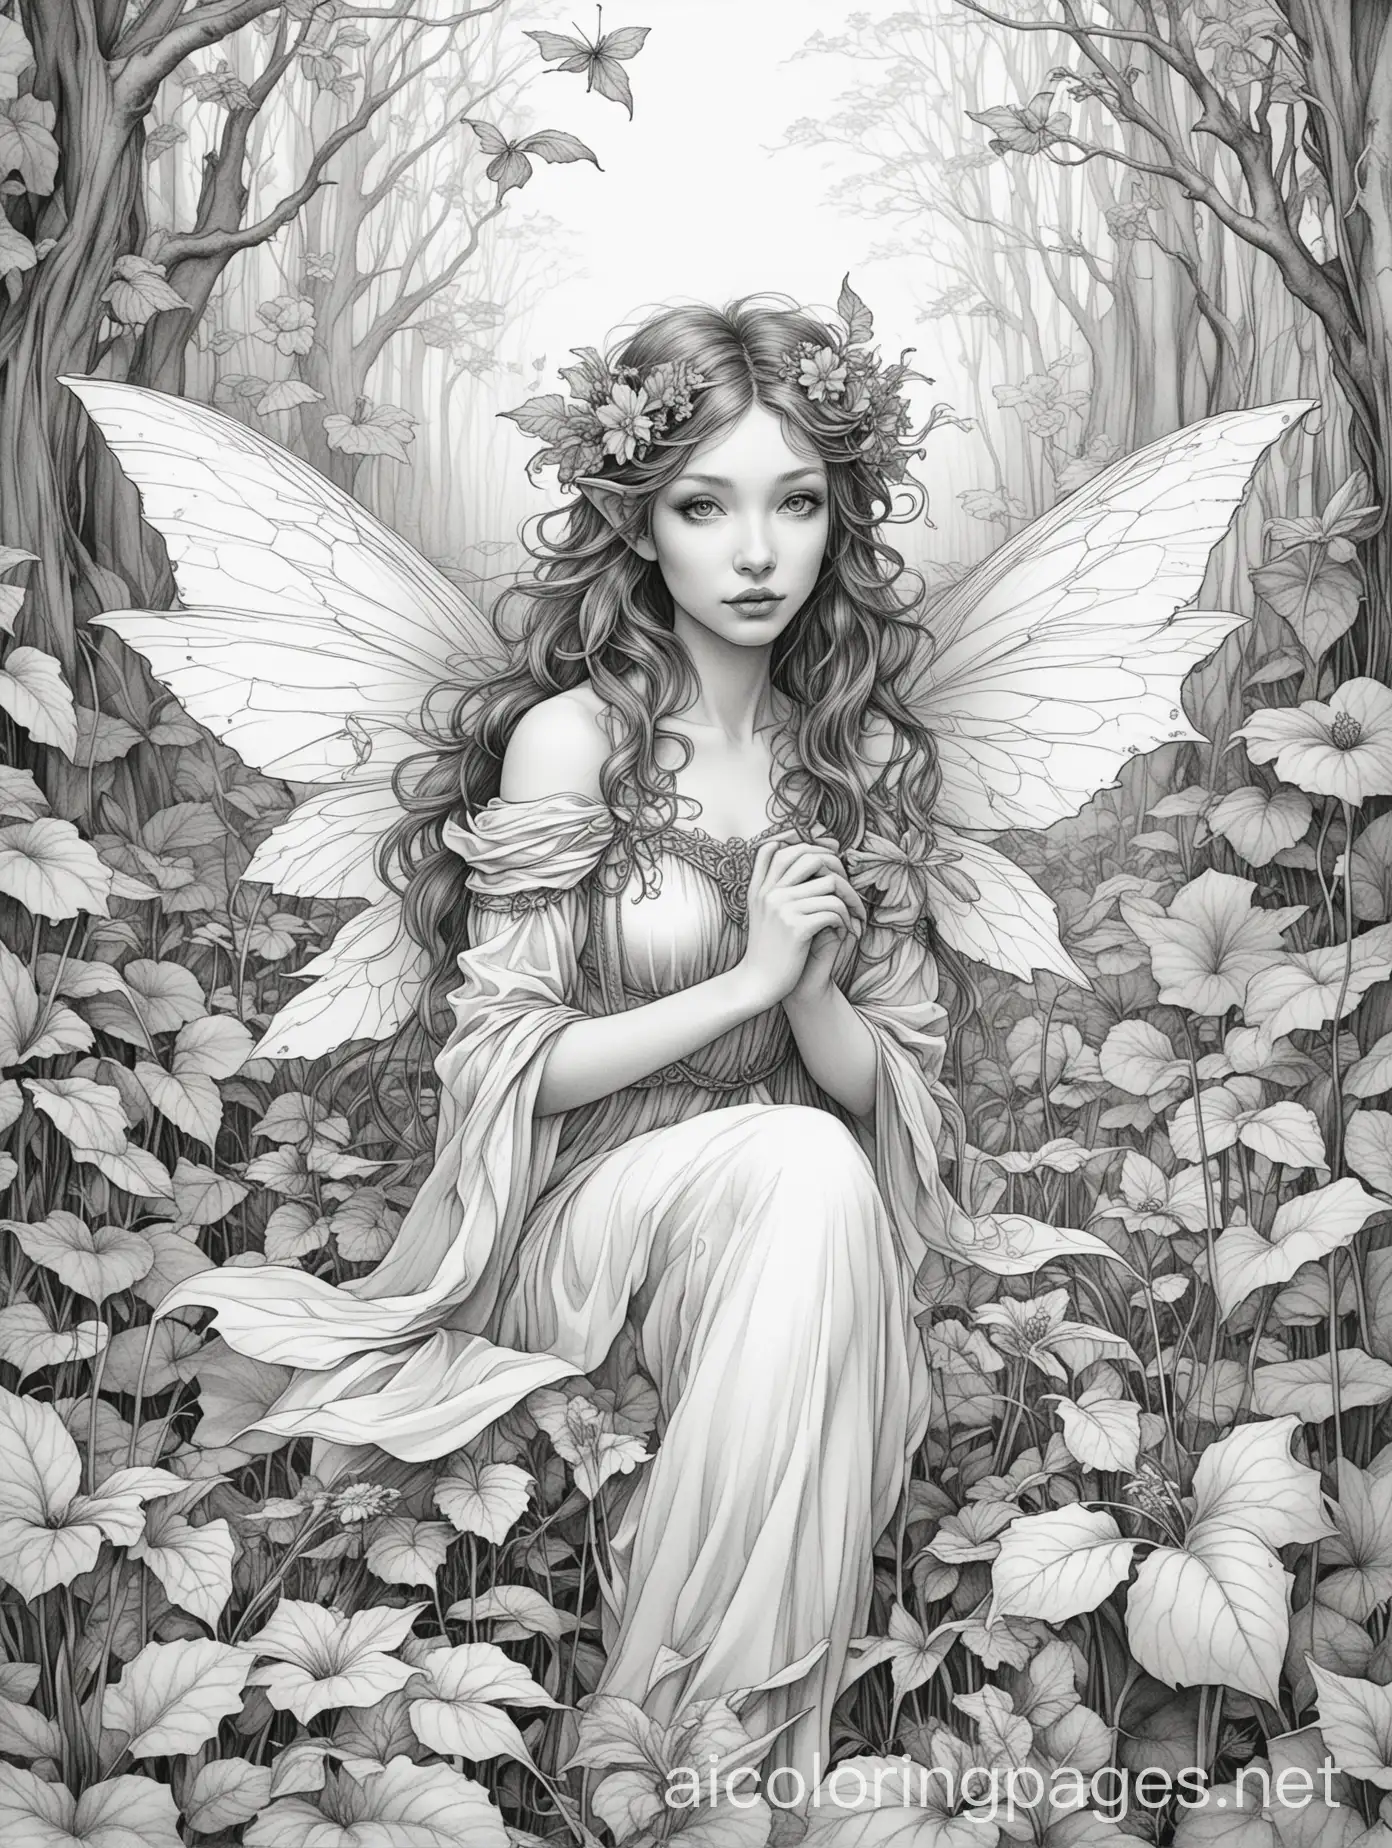 colouring page line art fairy land in the style of brian froud, Coloring Page, black and white, line art, white background, Simplicity, Ample White Space. The background of the coloring page is plain white to make it easy for young children to color within the lines. The outlines of all the subjects are easy to distinguish, making it simple for kids to color without too much difficulty